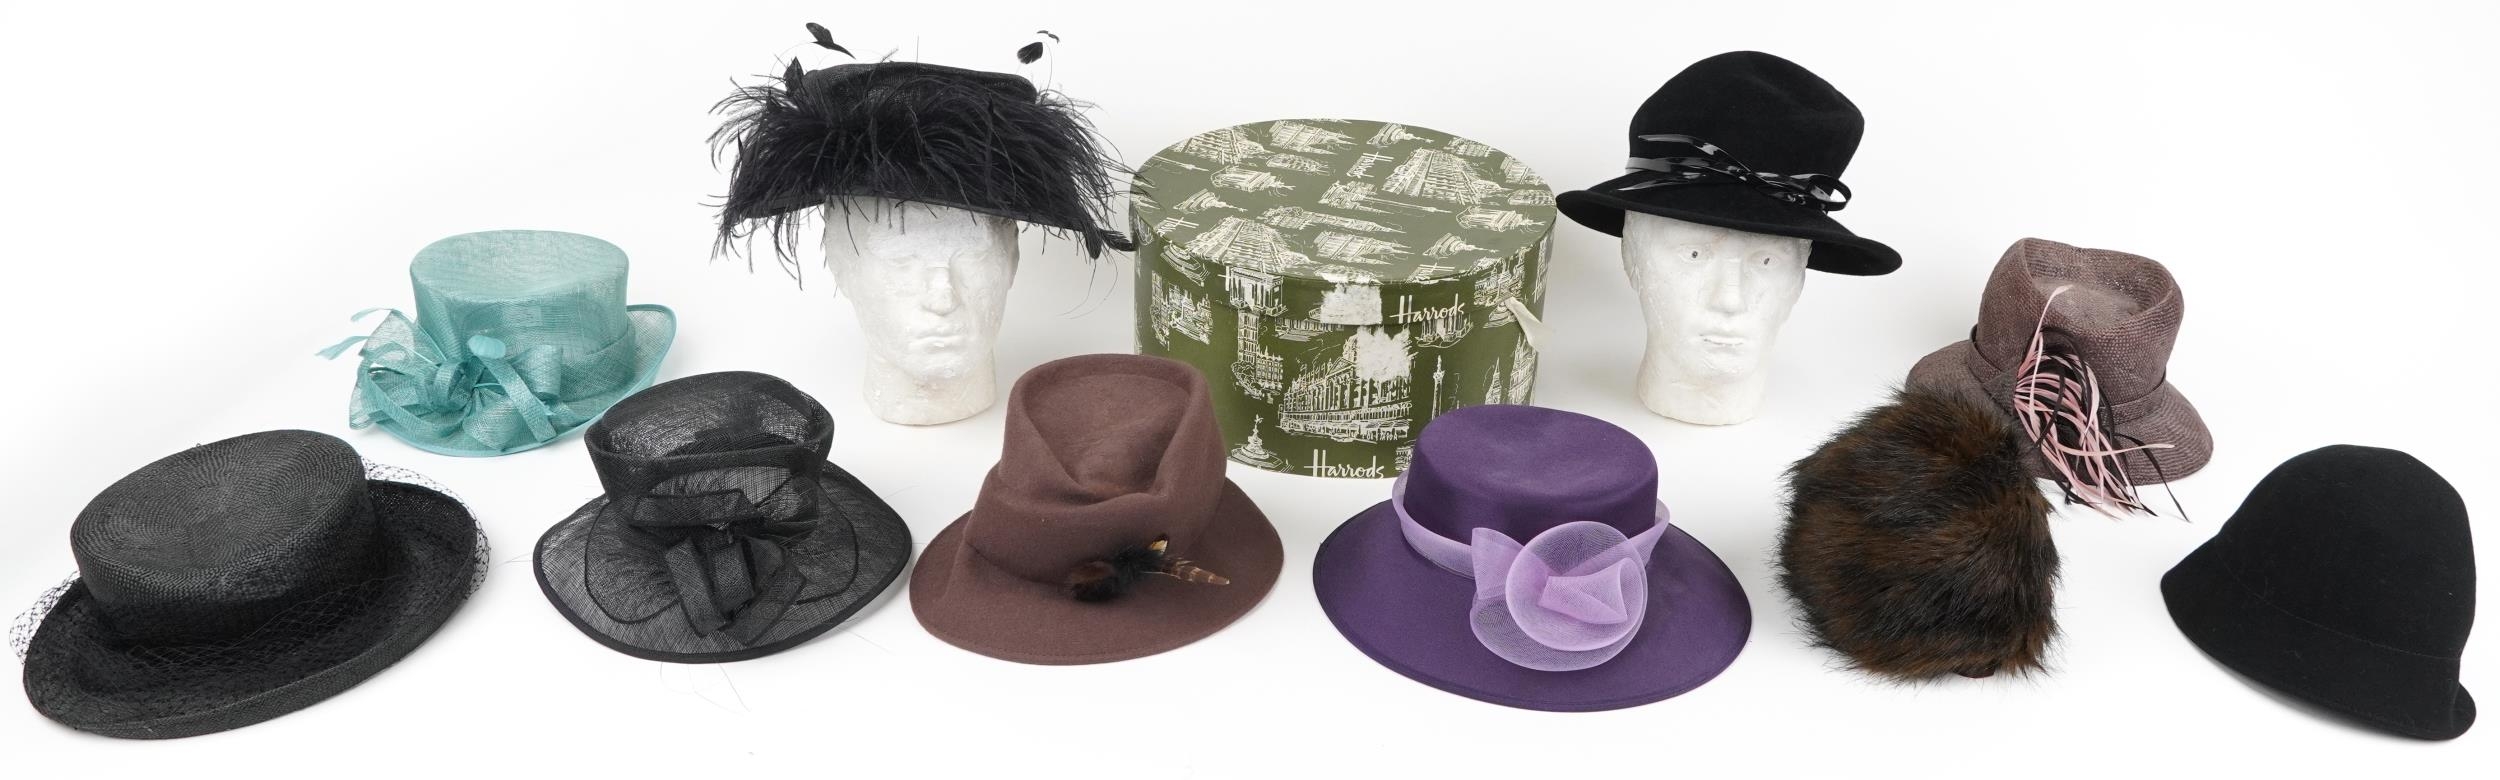 Vintage and later designer fascinator hats including a Harrods example with hatbox, the hatbox